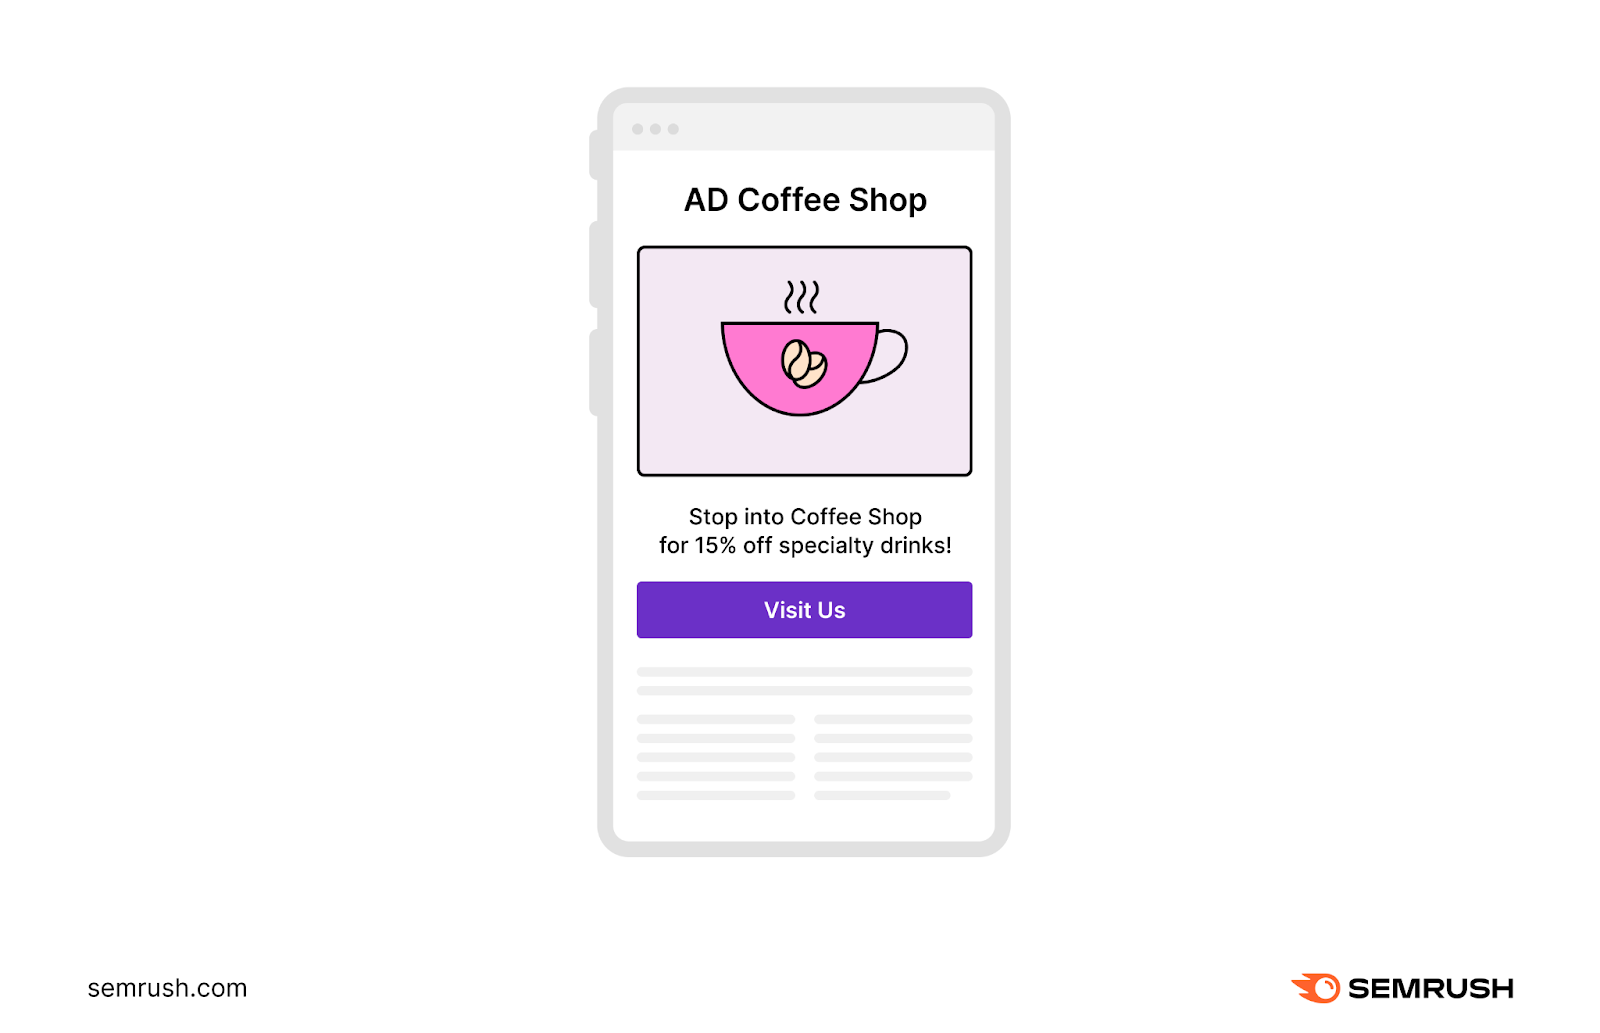 A personalized ad for a coffee shop on a mobile device